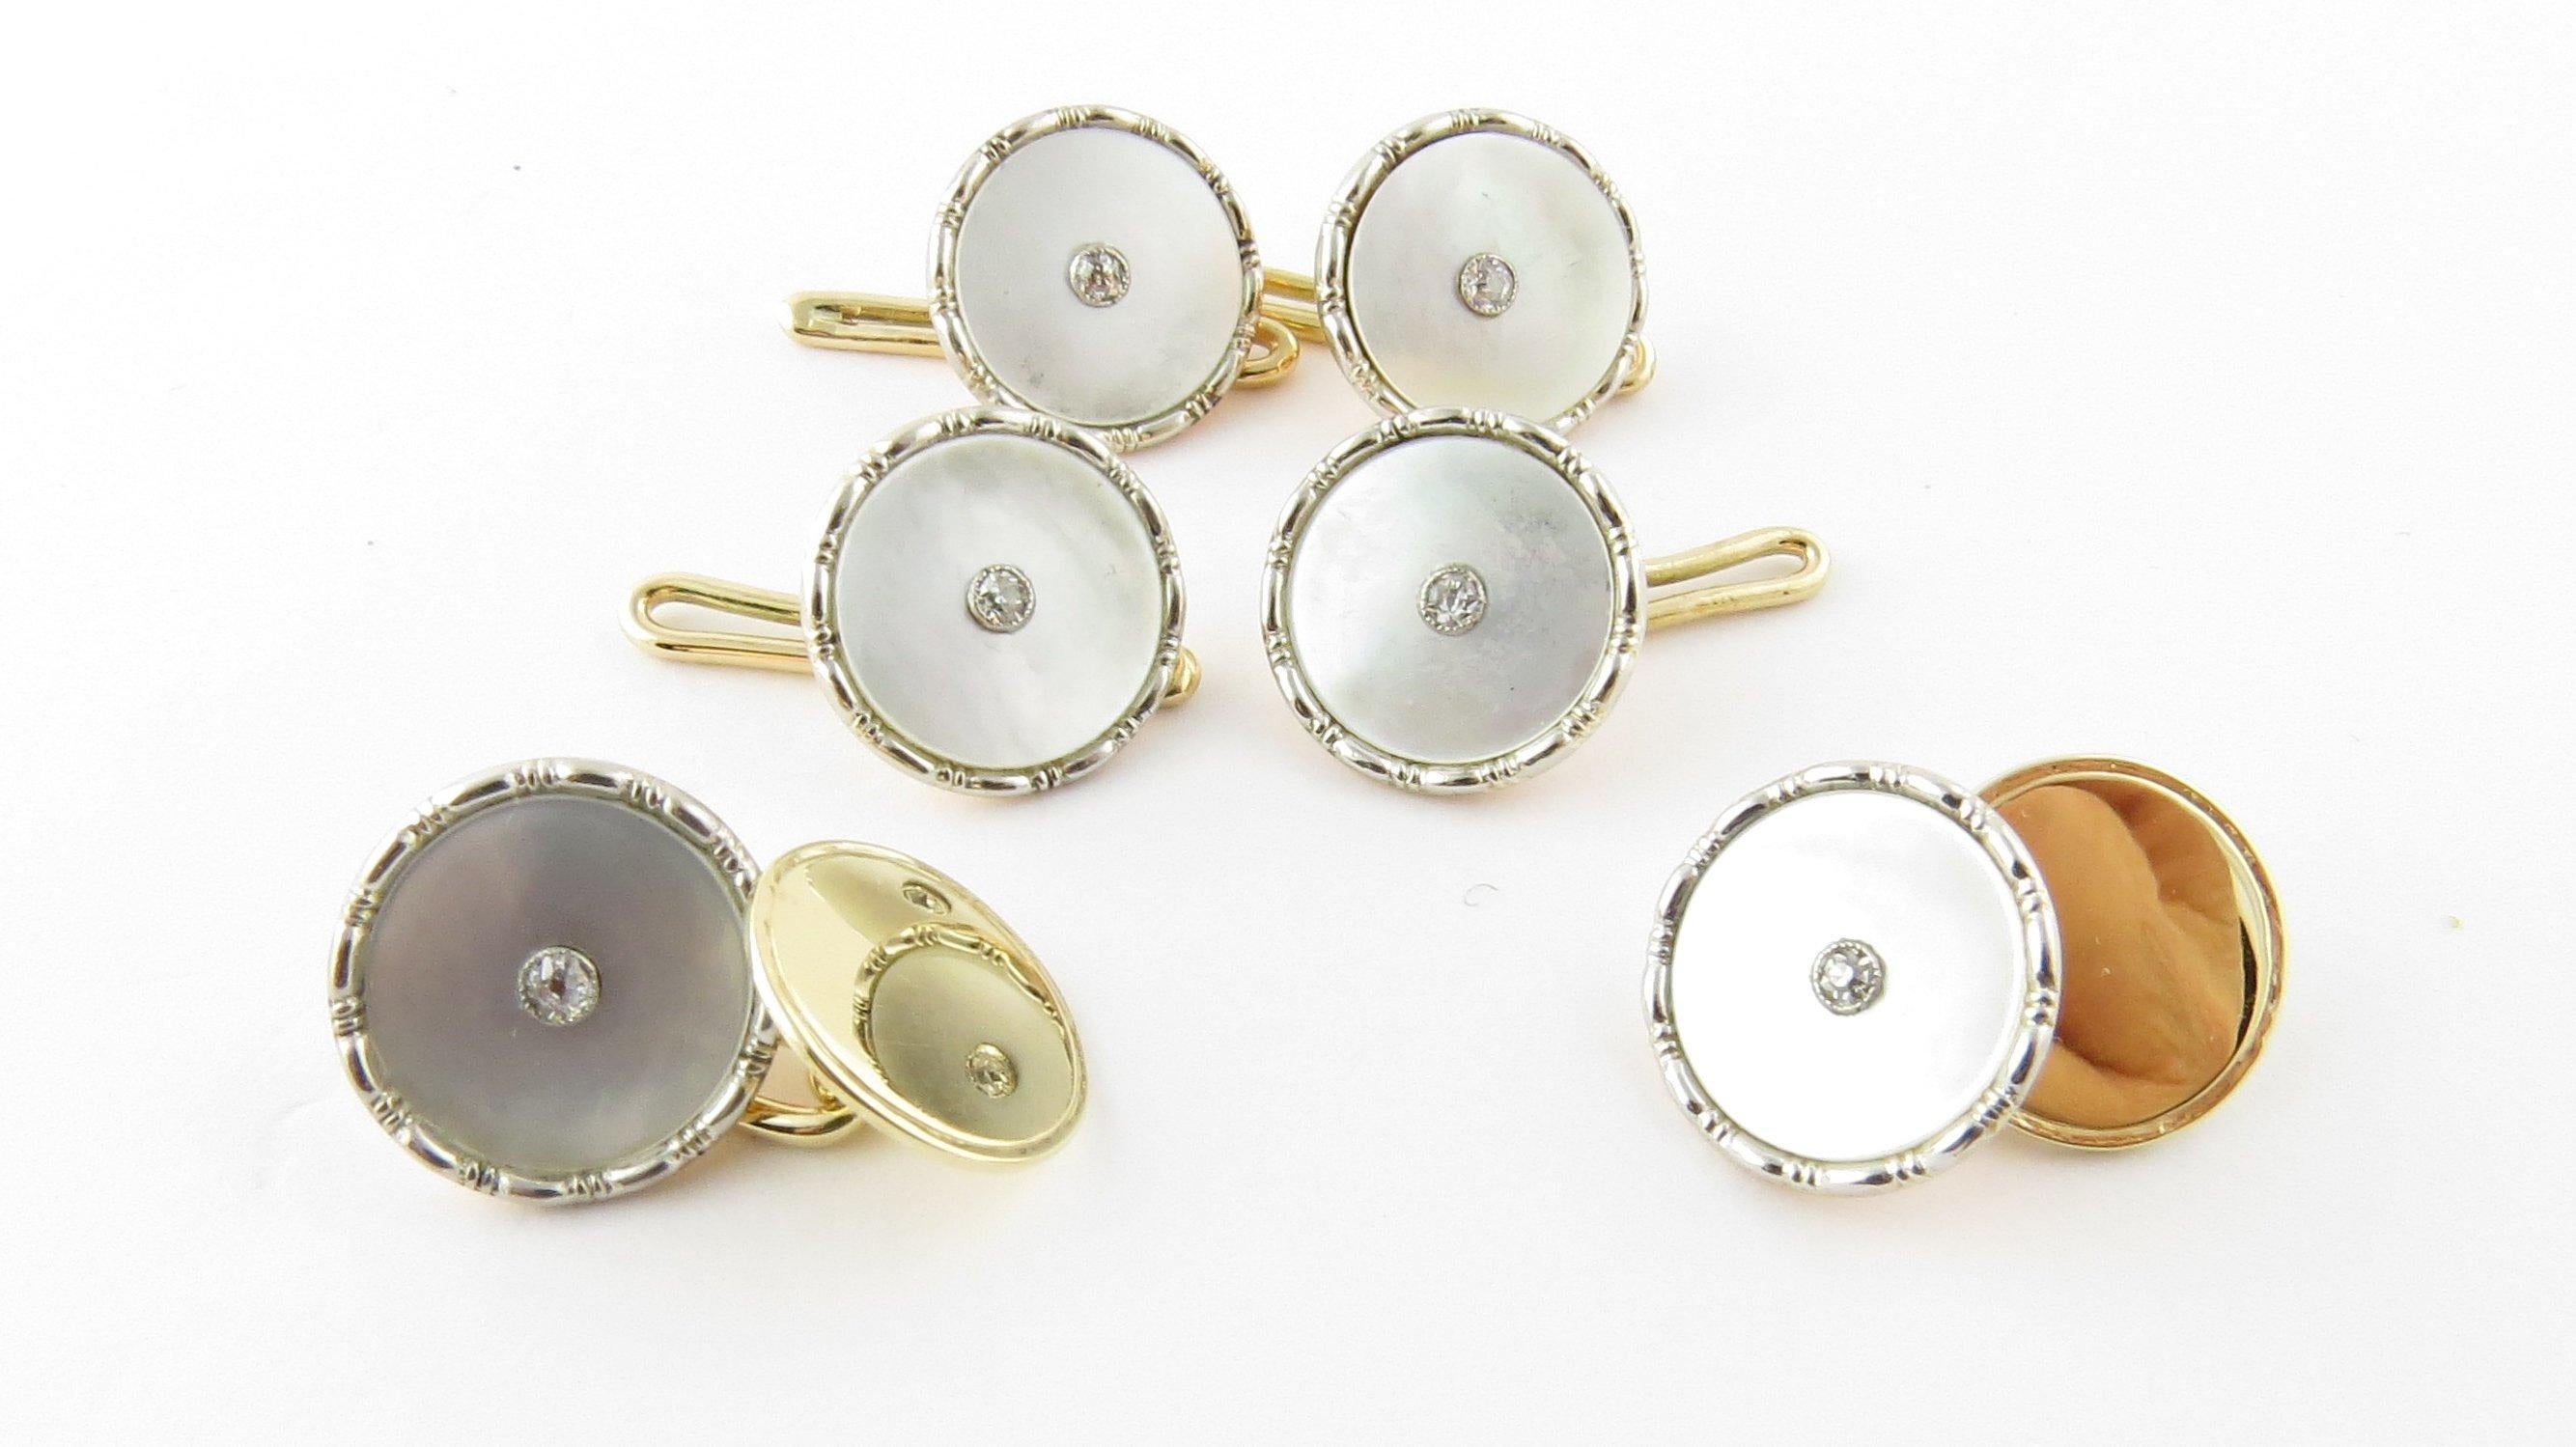 9 Karat Yellow Gold Mother of Pearl and Diamond Tuxedo Buttons and Cufflinks 3